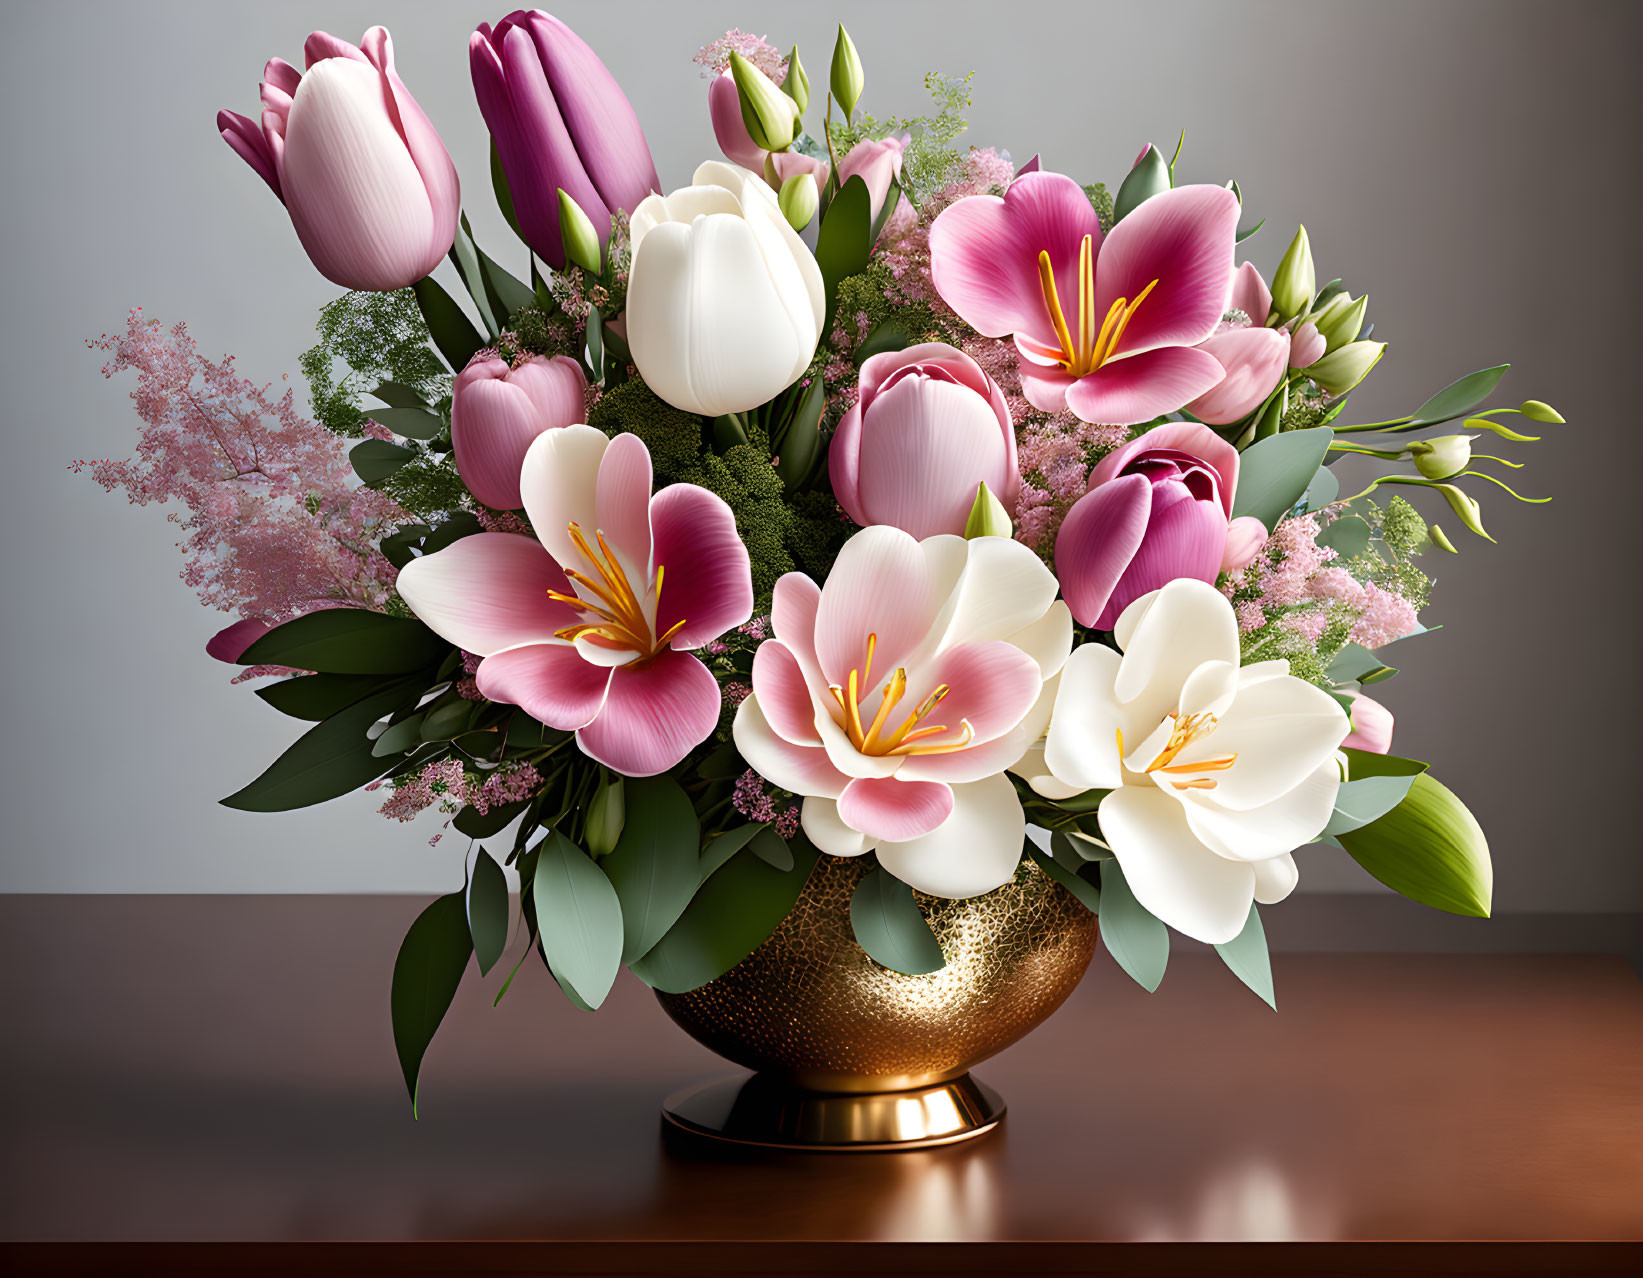 Pink Tulips and White-Pink Lilies in Golden Vase Bouquet Display